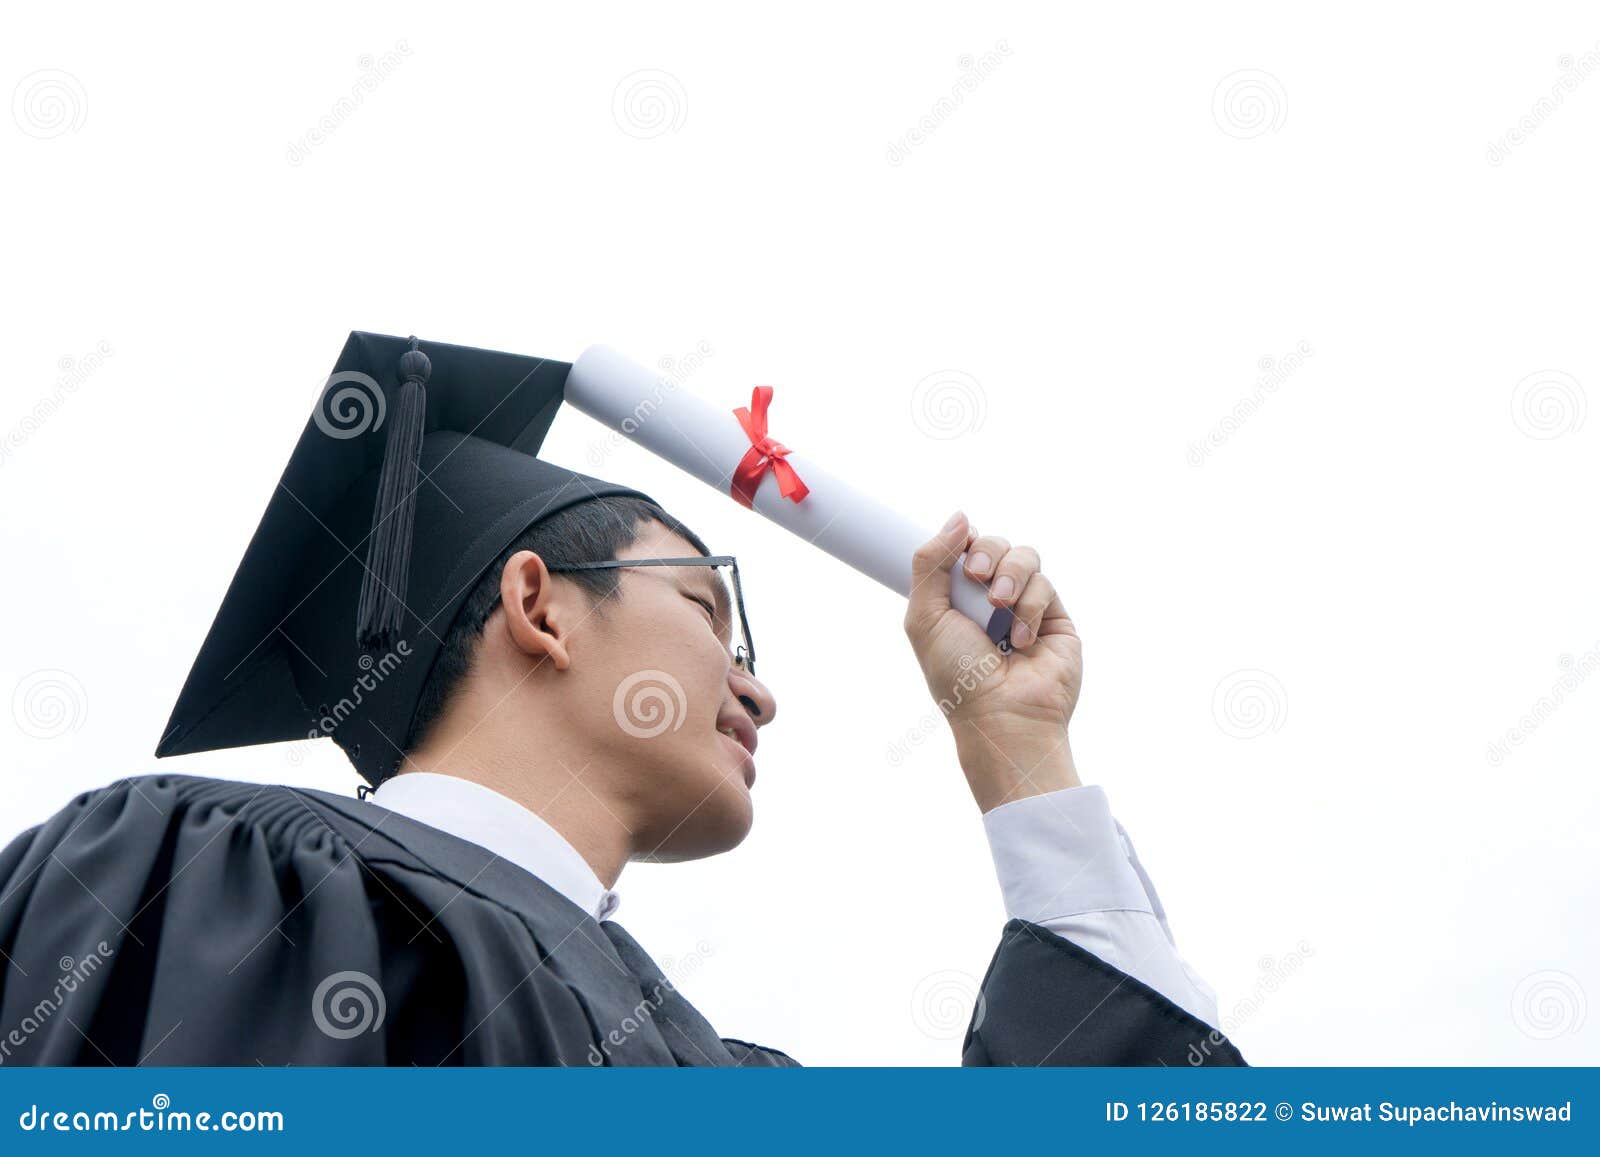 Graduation Cap and Gown History | GraduationSource